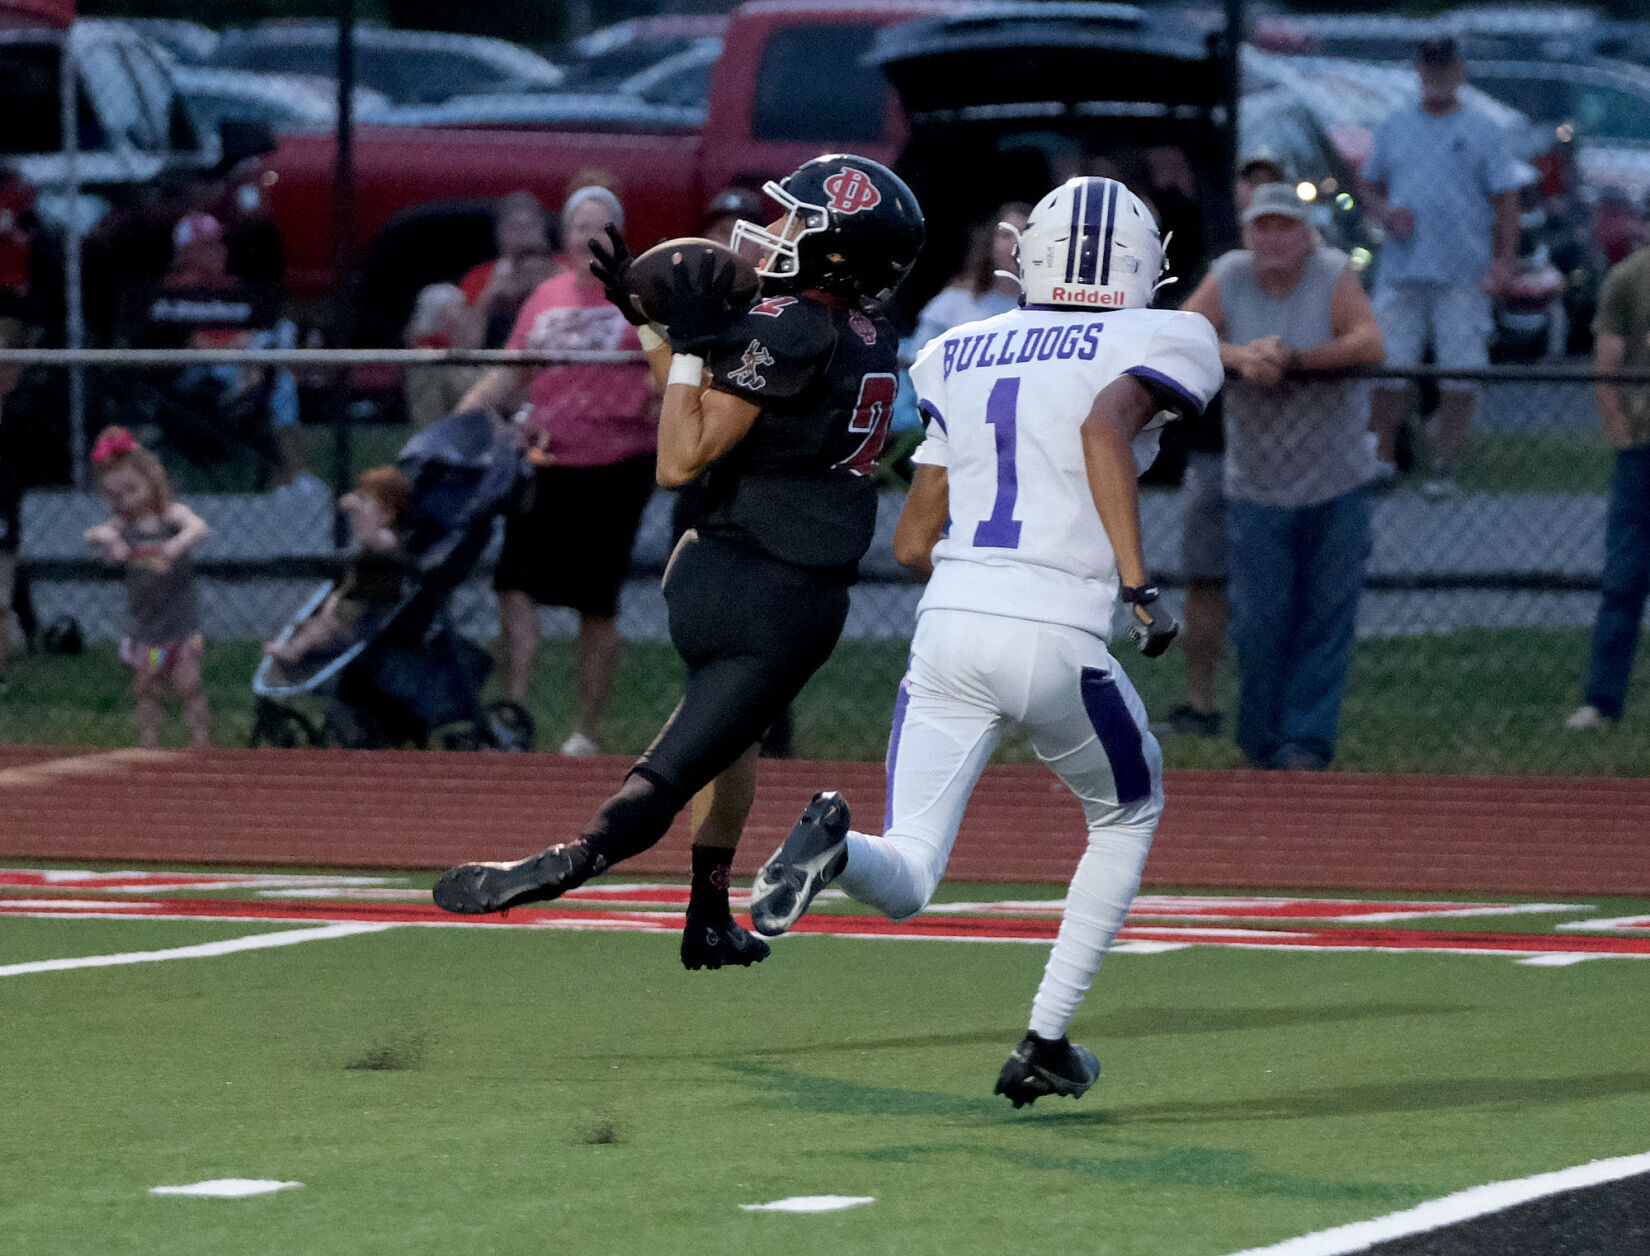 Du Quoin’s Waller connects with Winters for game-winning touchdown